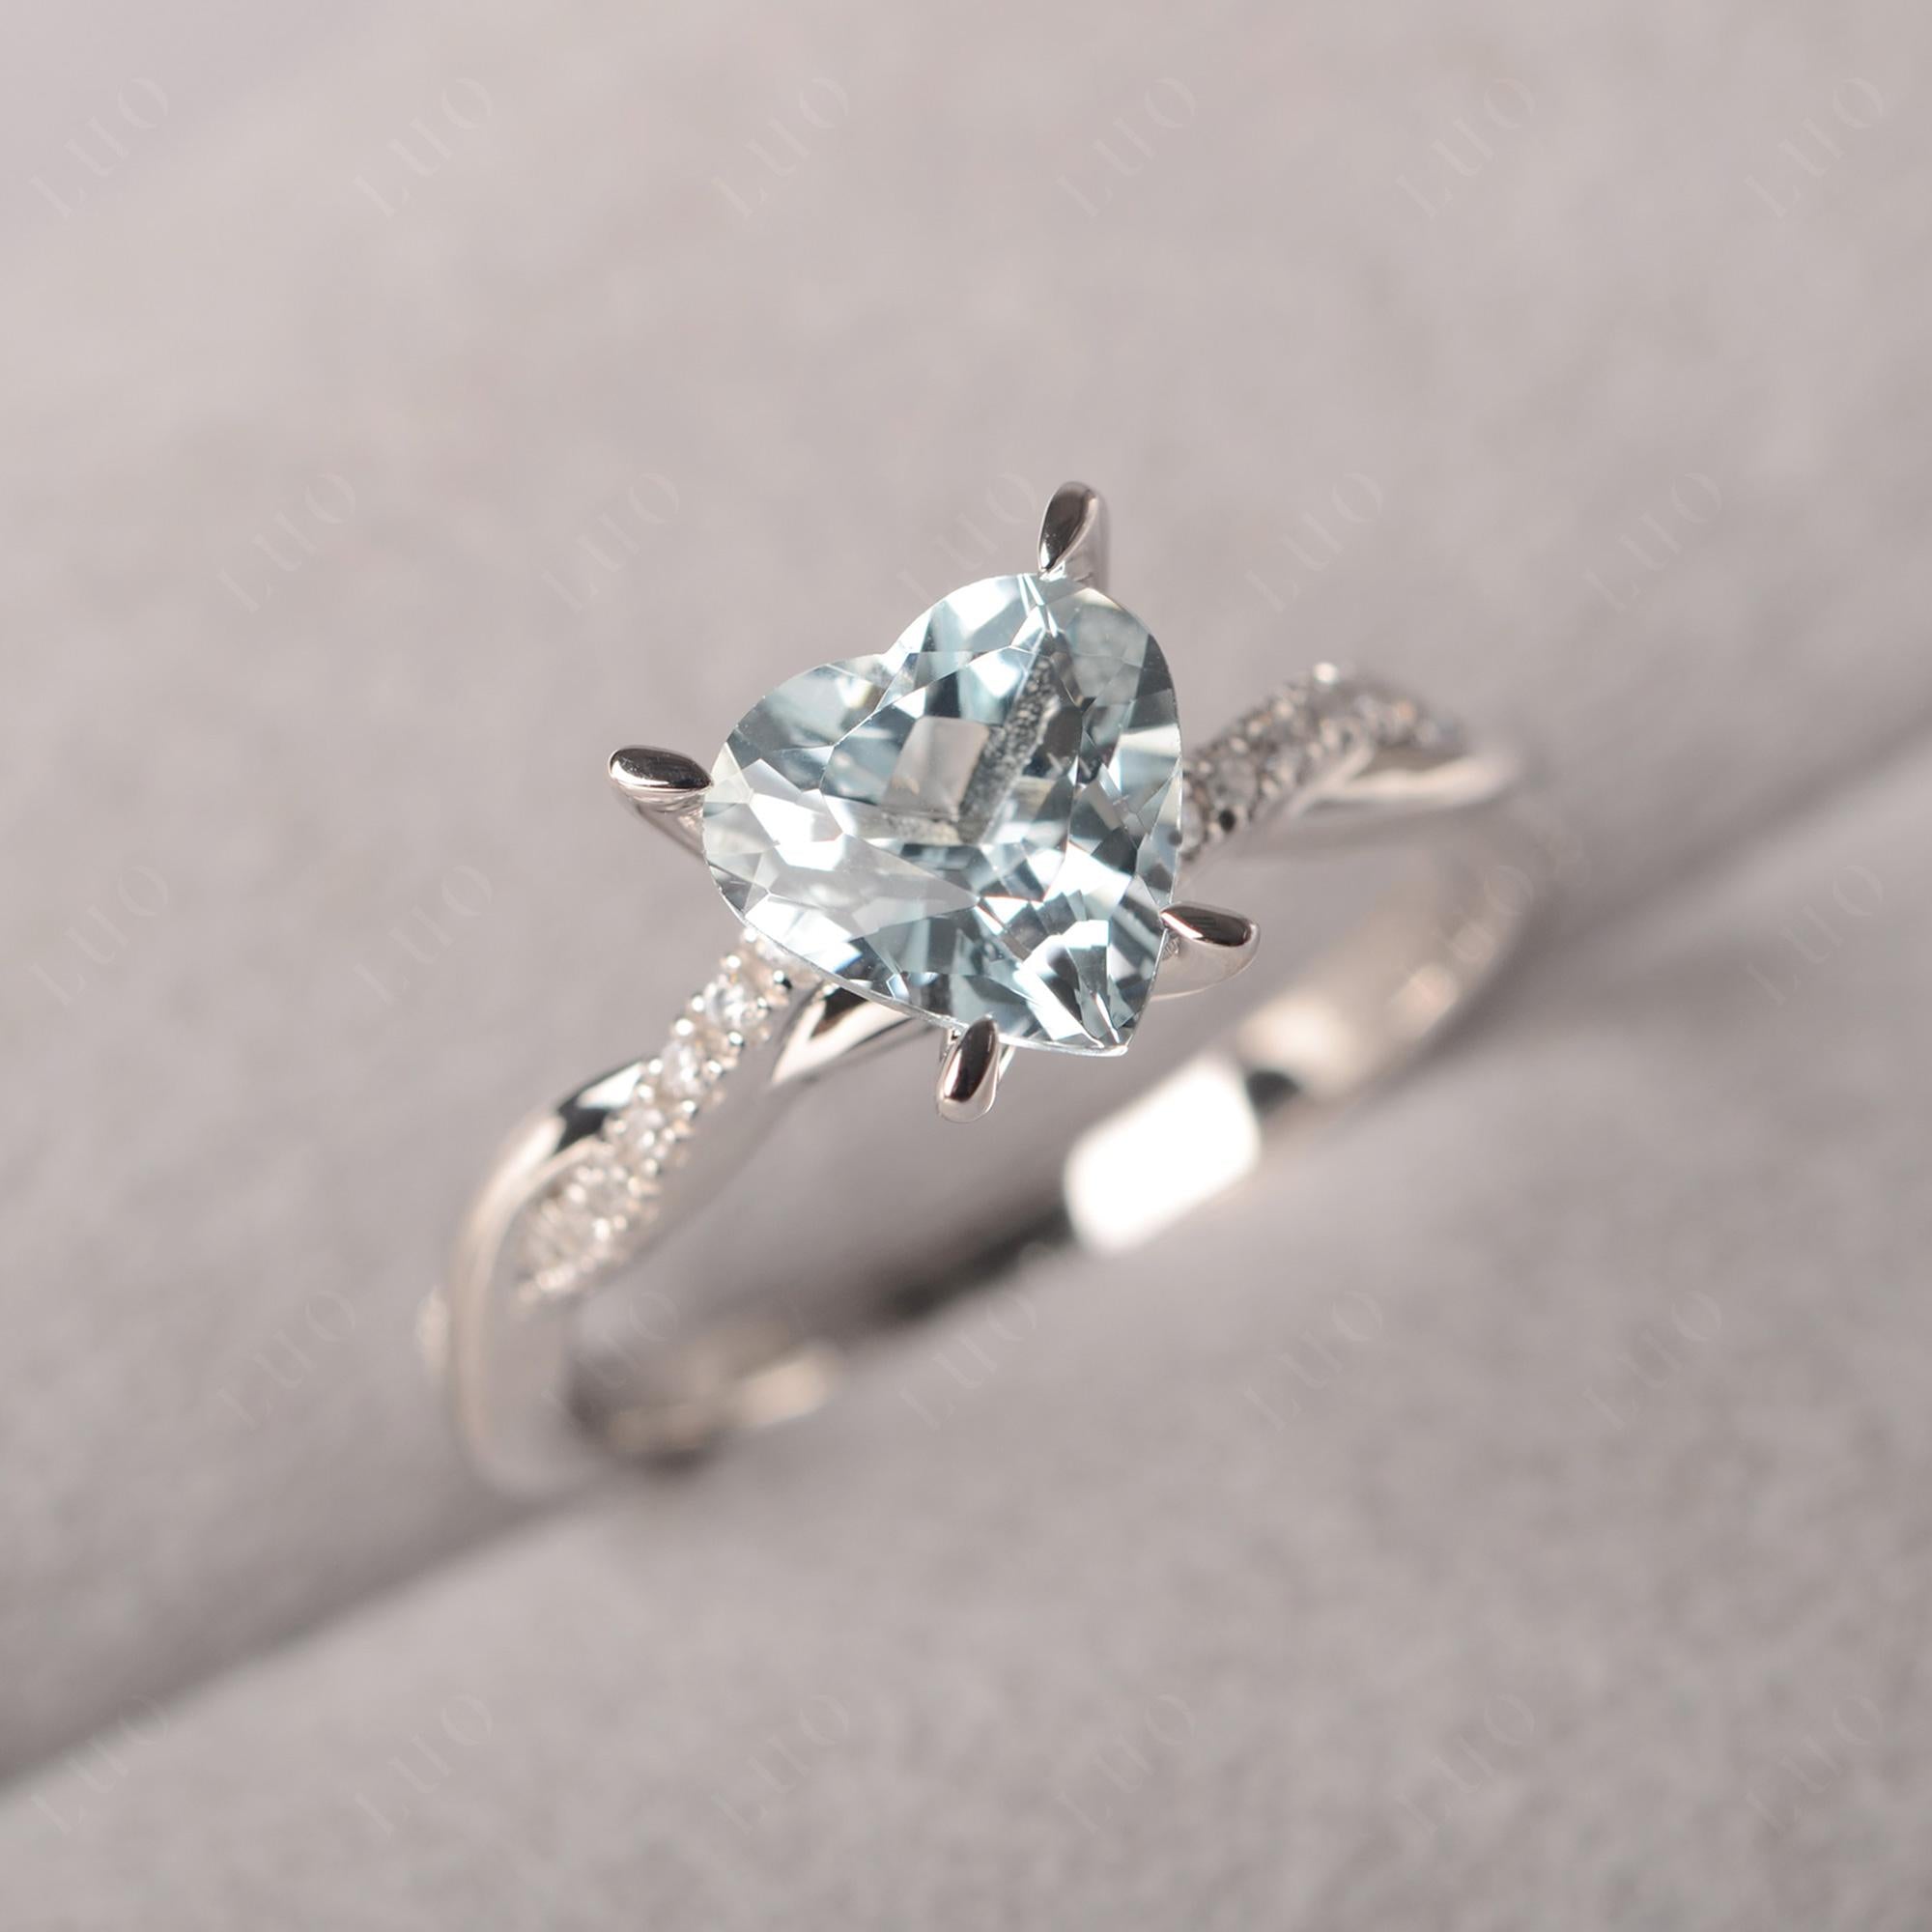 Twisted Heart Shaped Aquamarine Ring - LUO Jewelry